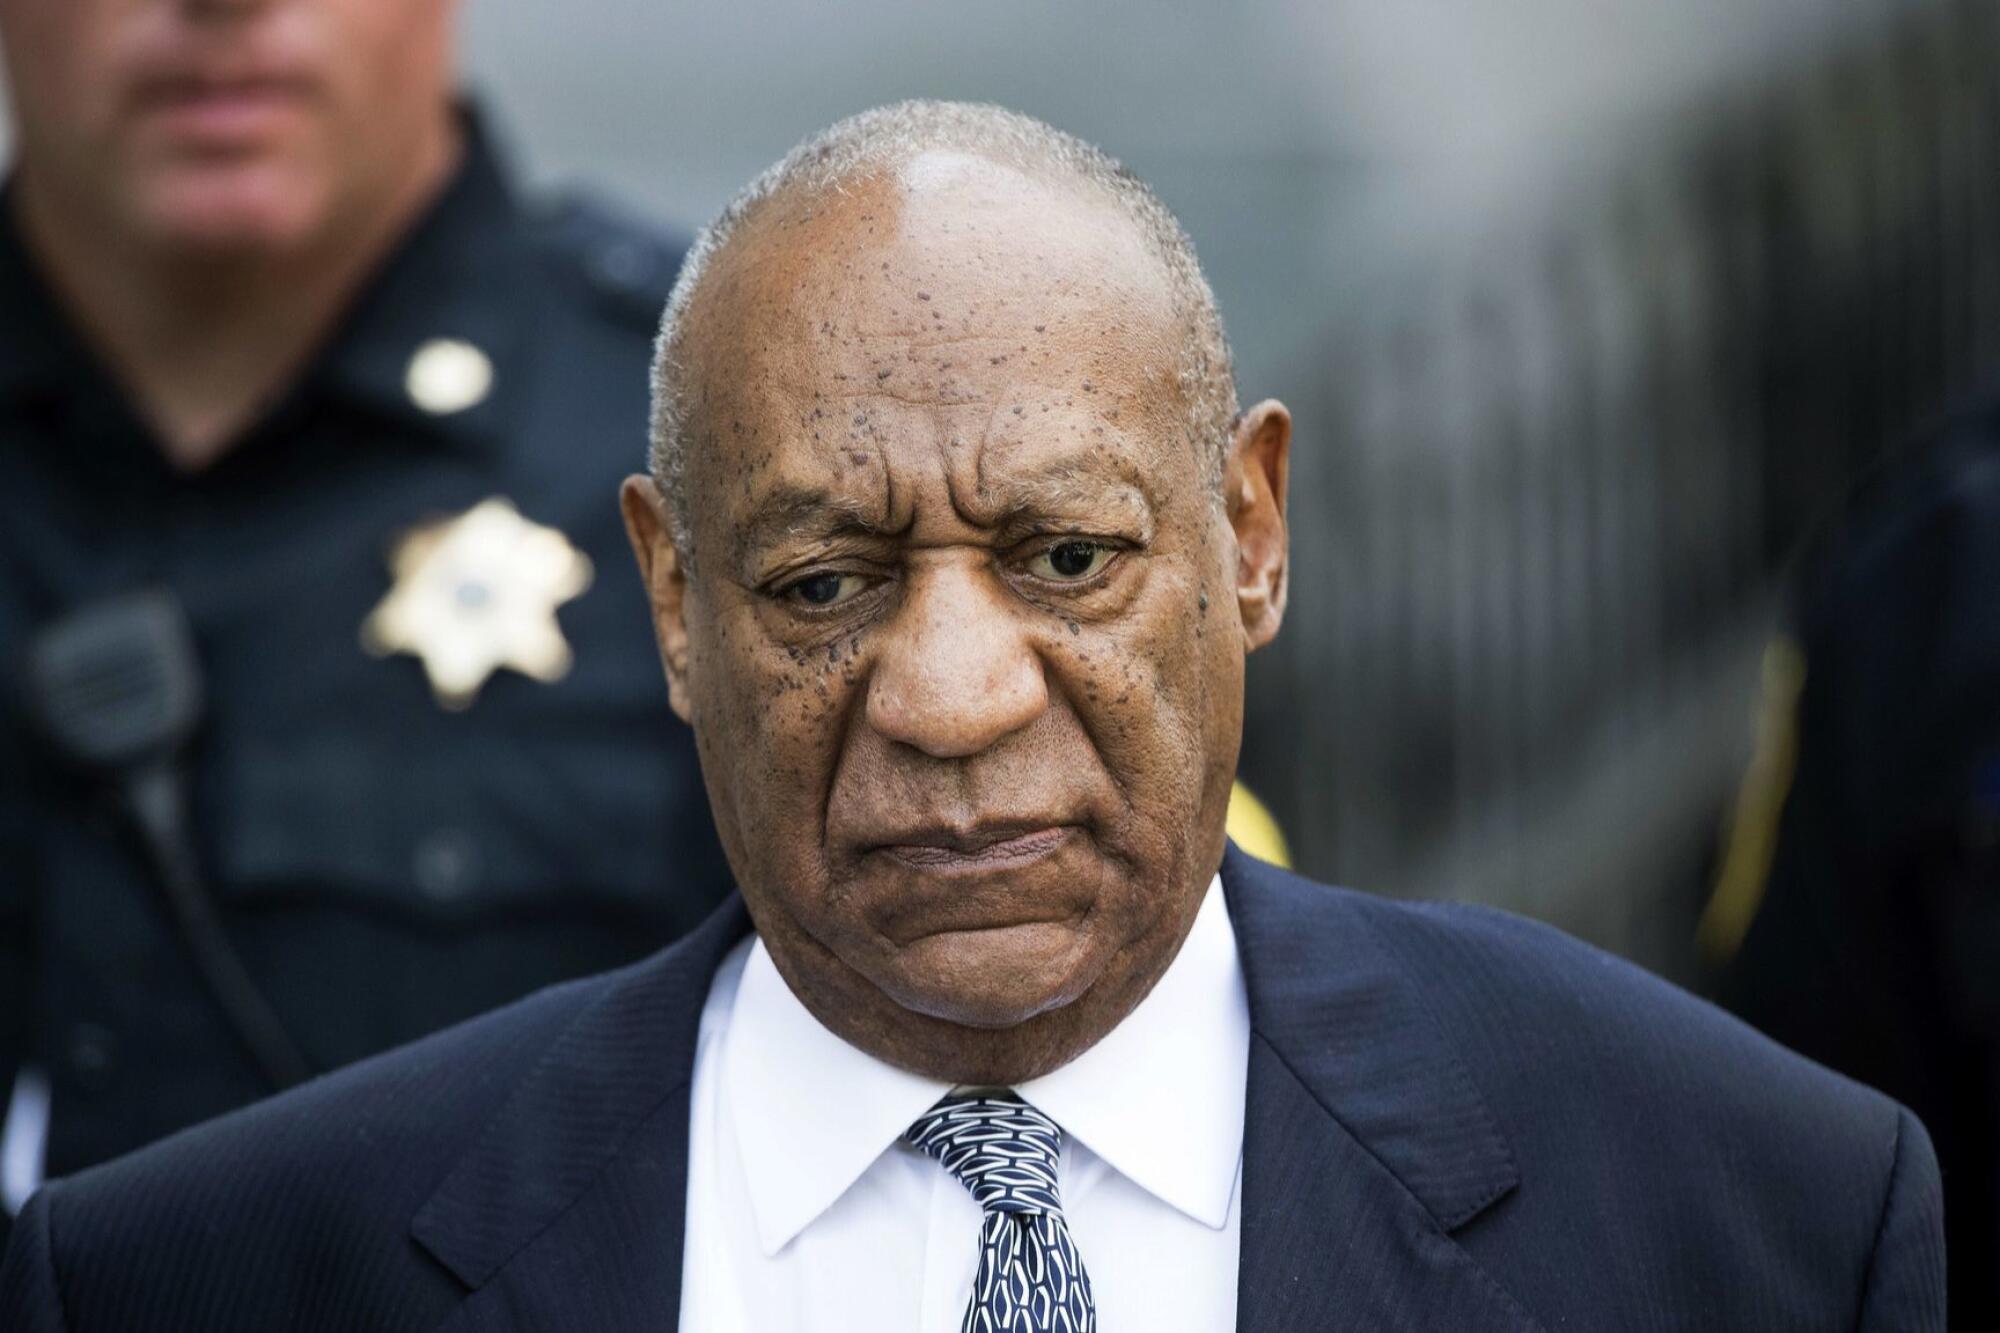 Bill Cosby leaves after a hearing in his sexual assault case in Norristown, Pa., in 2017.